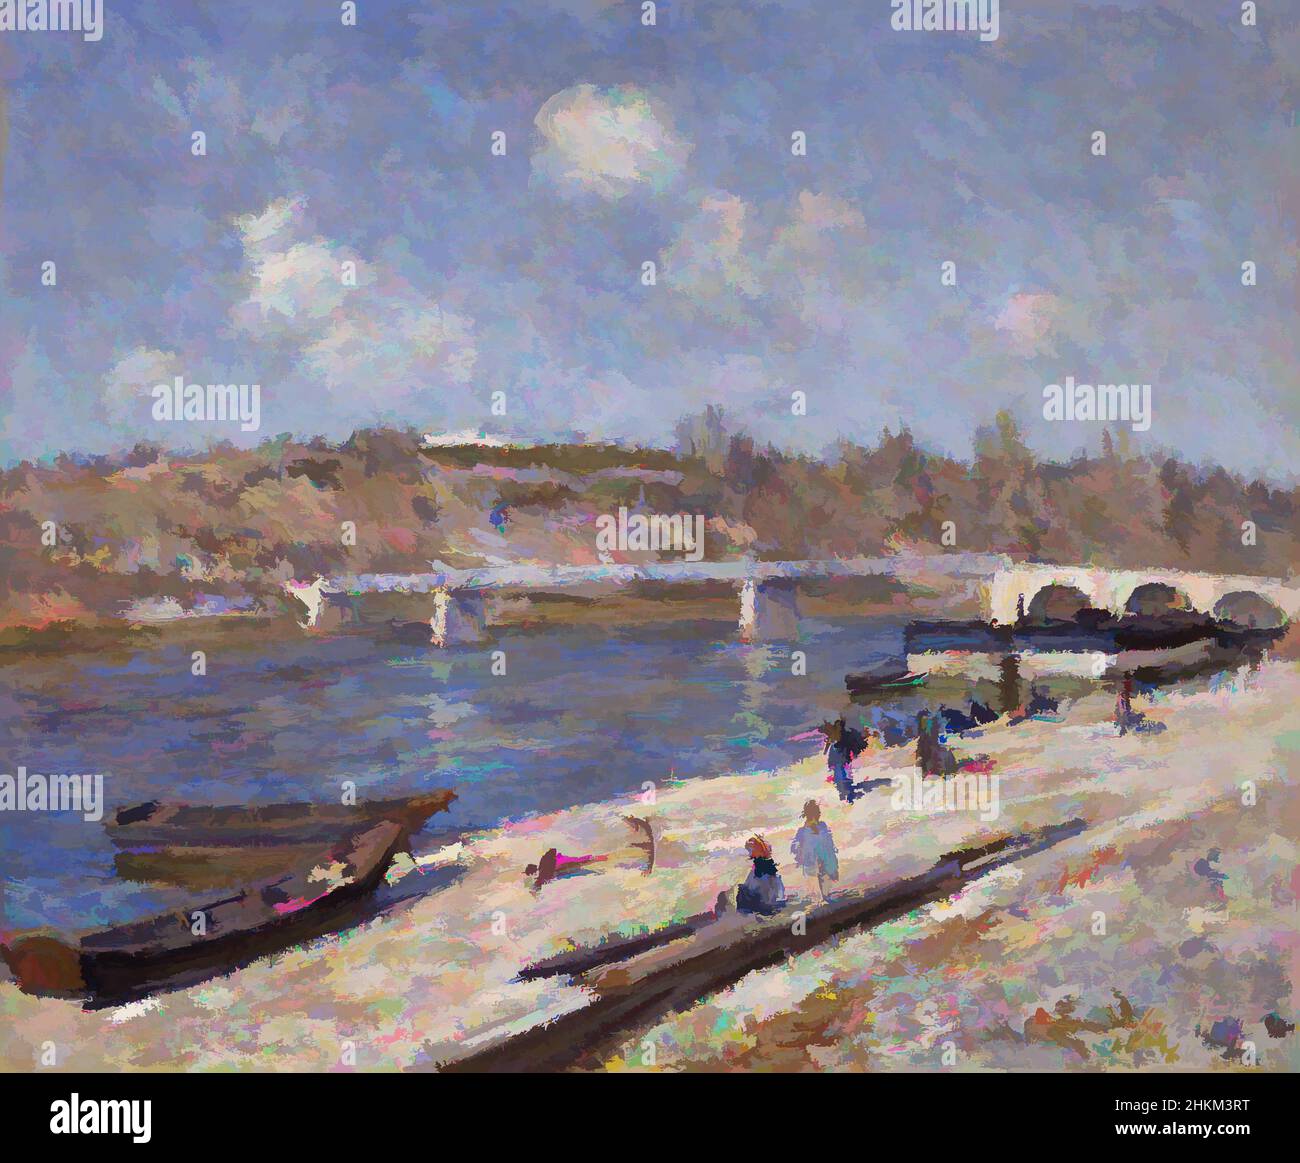 Art inspired by The Beach at Saint-Mammès, Alfred Sisley, English (born France), 1839–1899, 1884, Oil on canvas, Moret-sur-Loing, Île-de-France, France, Europe, Paintings, 20 3/8 × 24 1/2 in. (51.8 × 62.2 cm, Classic works modernized by Artotop with a splash of modernity. Shapes, color and value, eye-catching visual impact on art. Emotions through freedom of artworks in a contemporary way. A timeless message pursuing a wildly creative new direction. Artists turning to the digital medium and creating the Artotop NFT Stock Photo